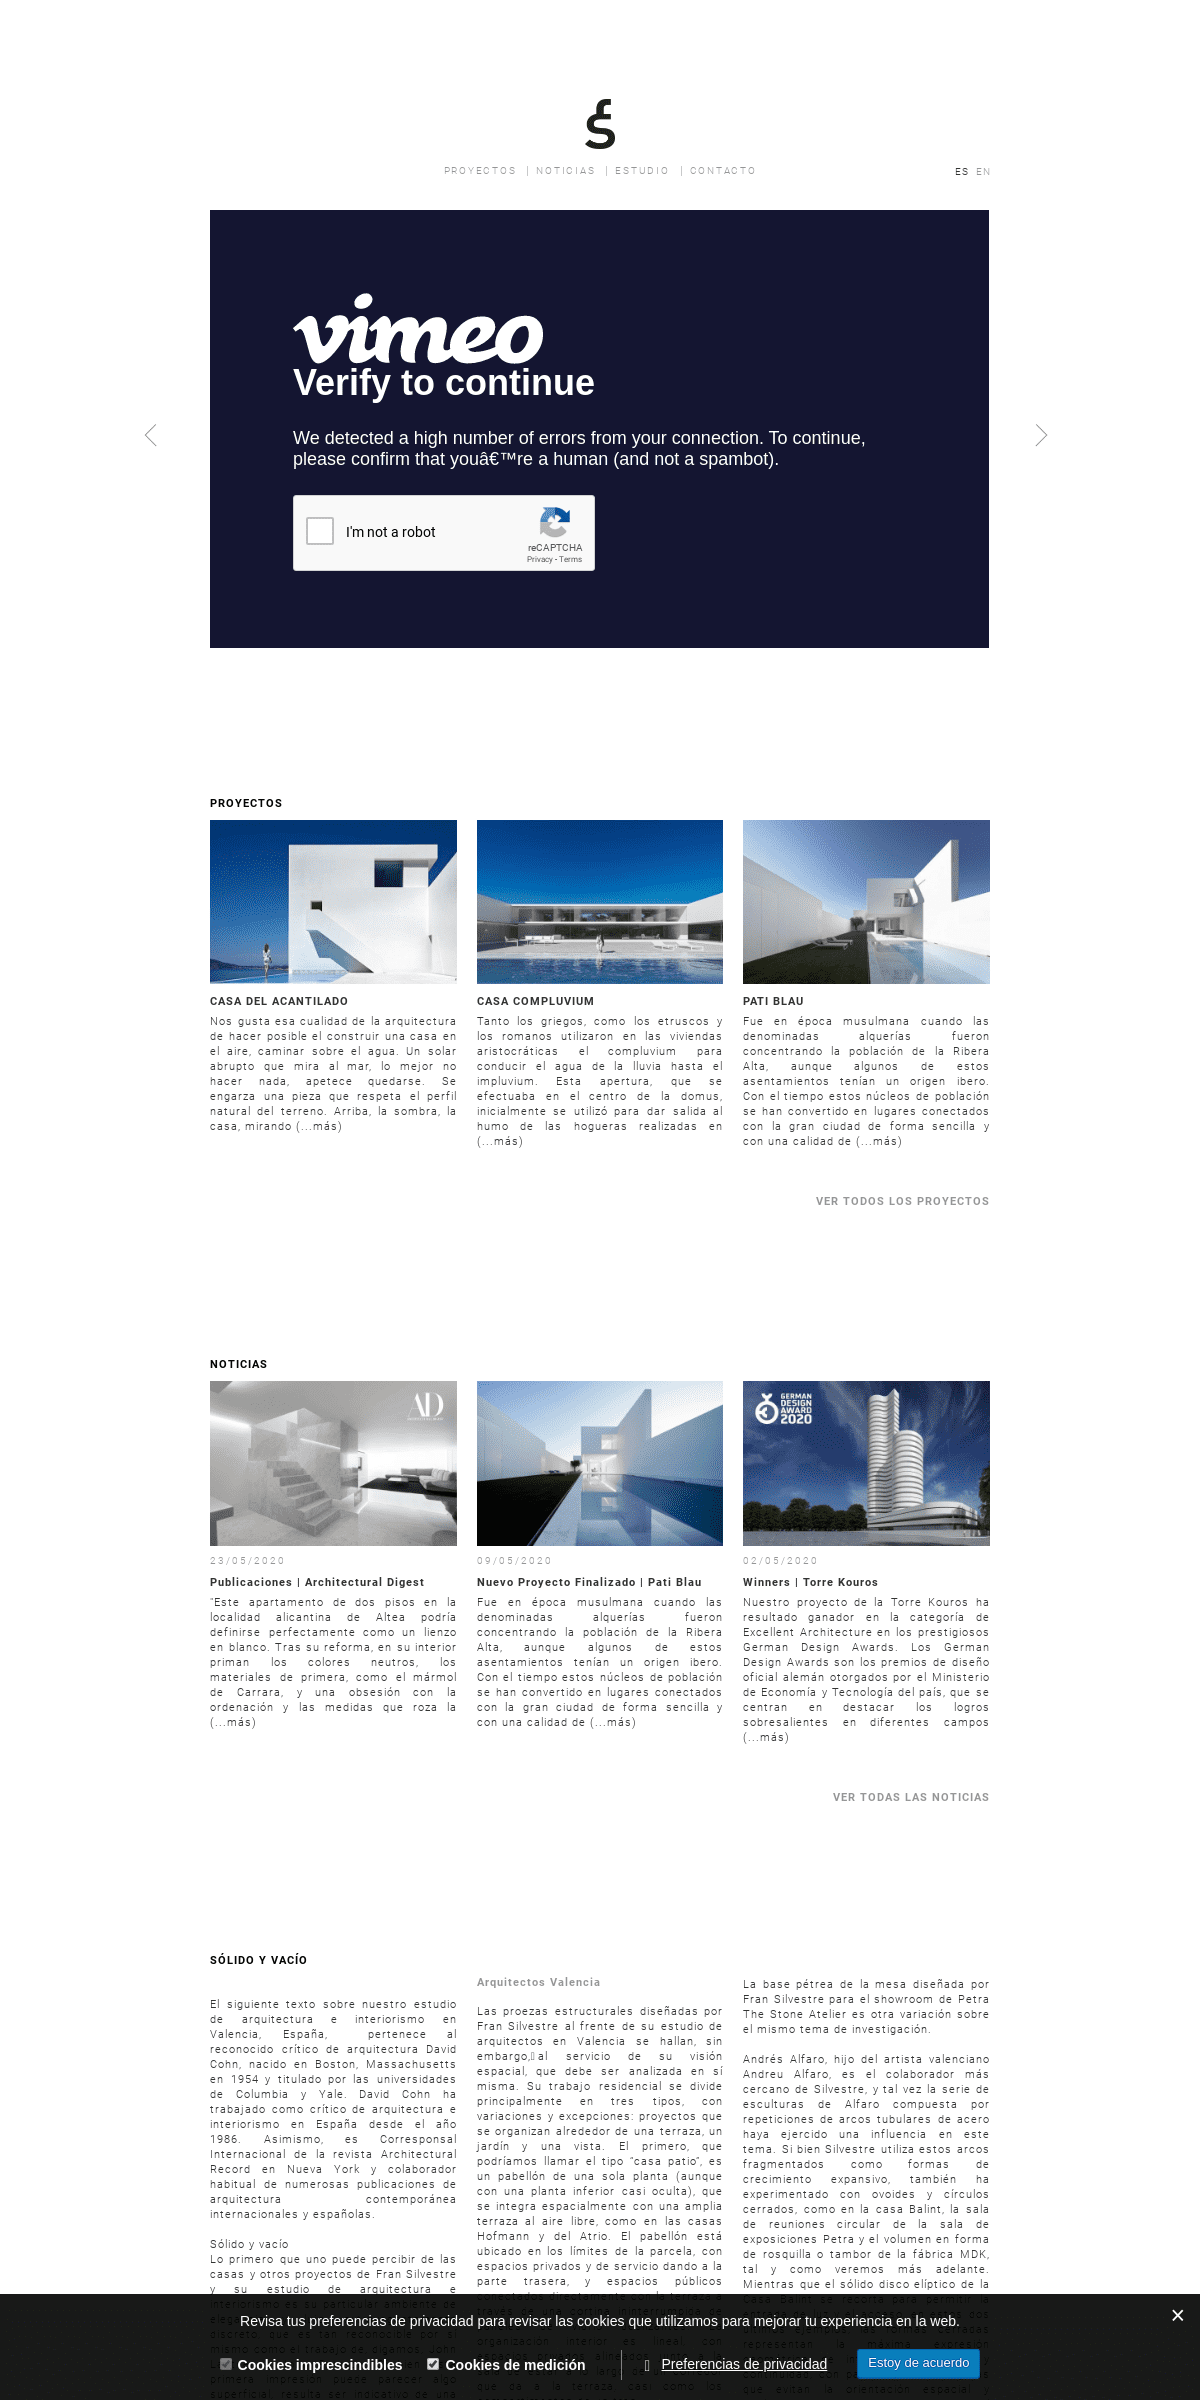 A complete backup of fransilvestrearquitectos.com